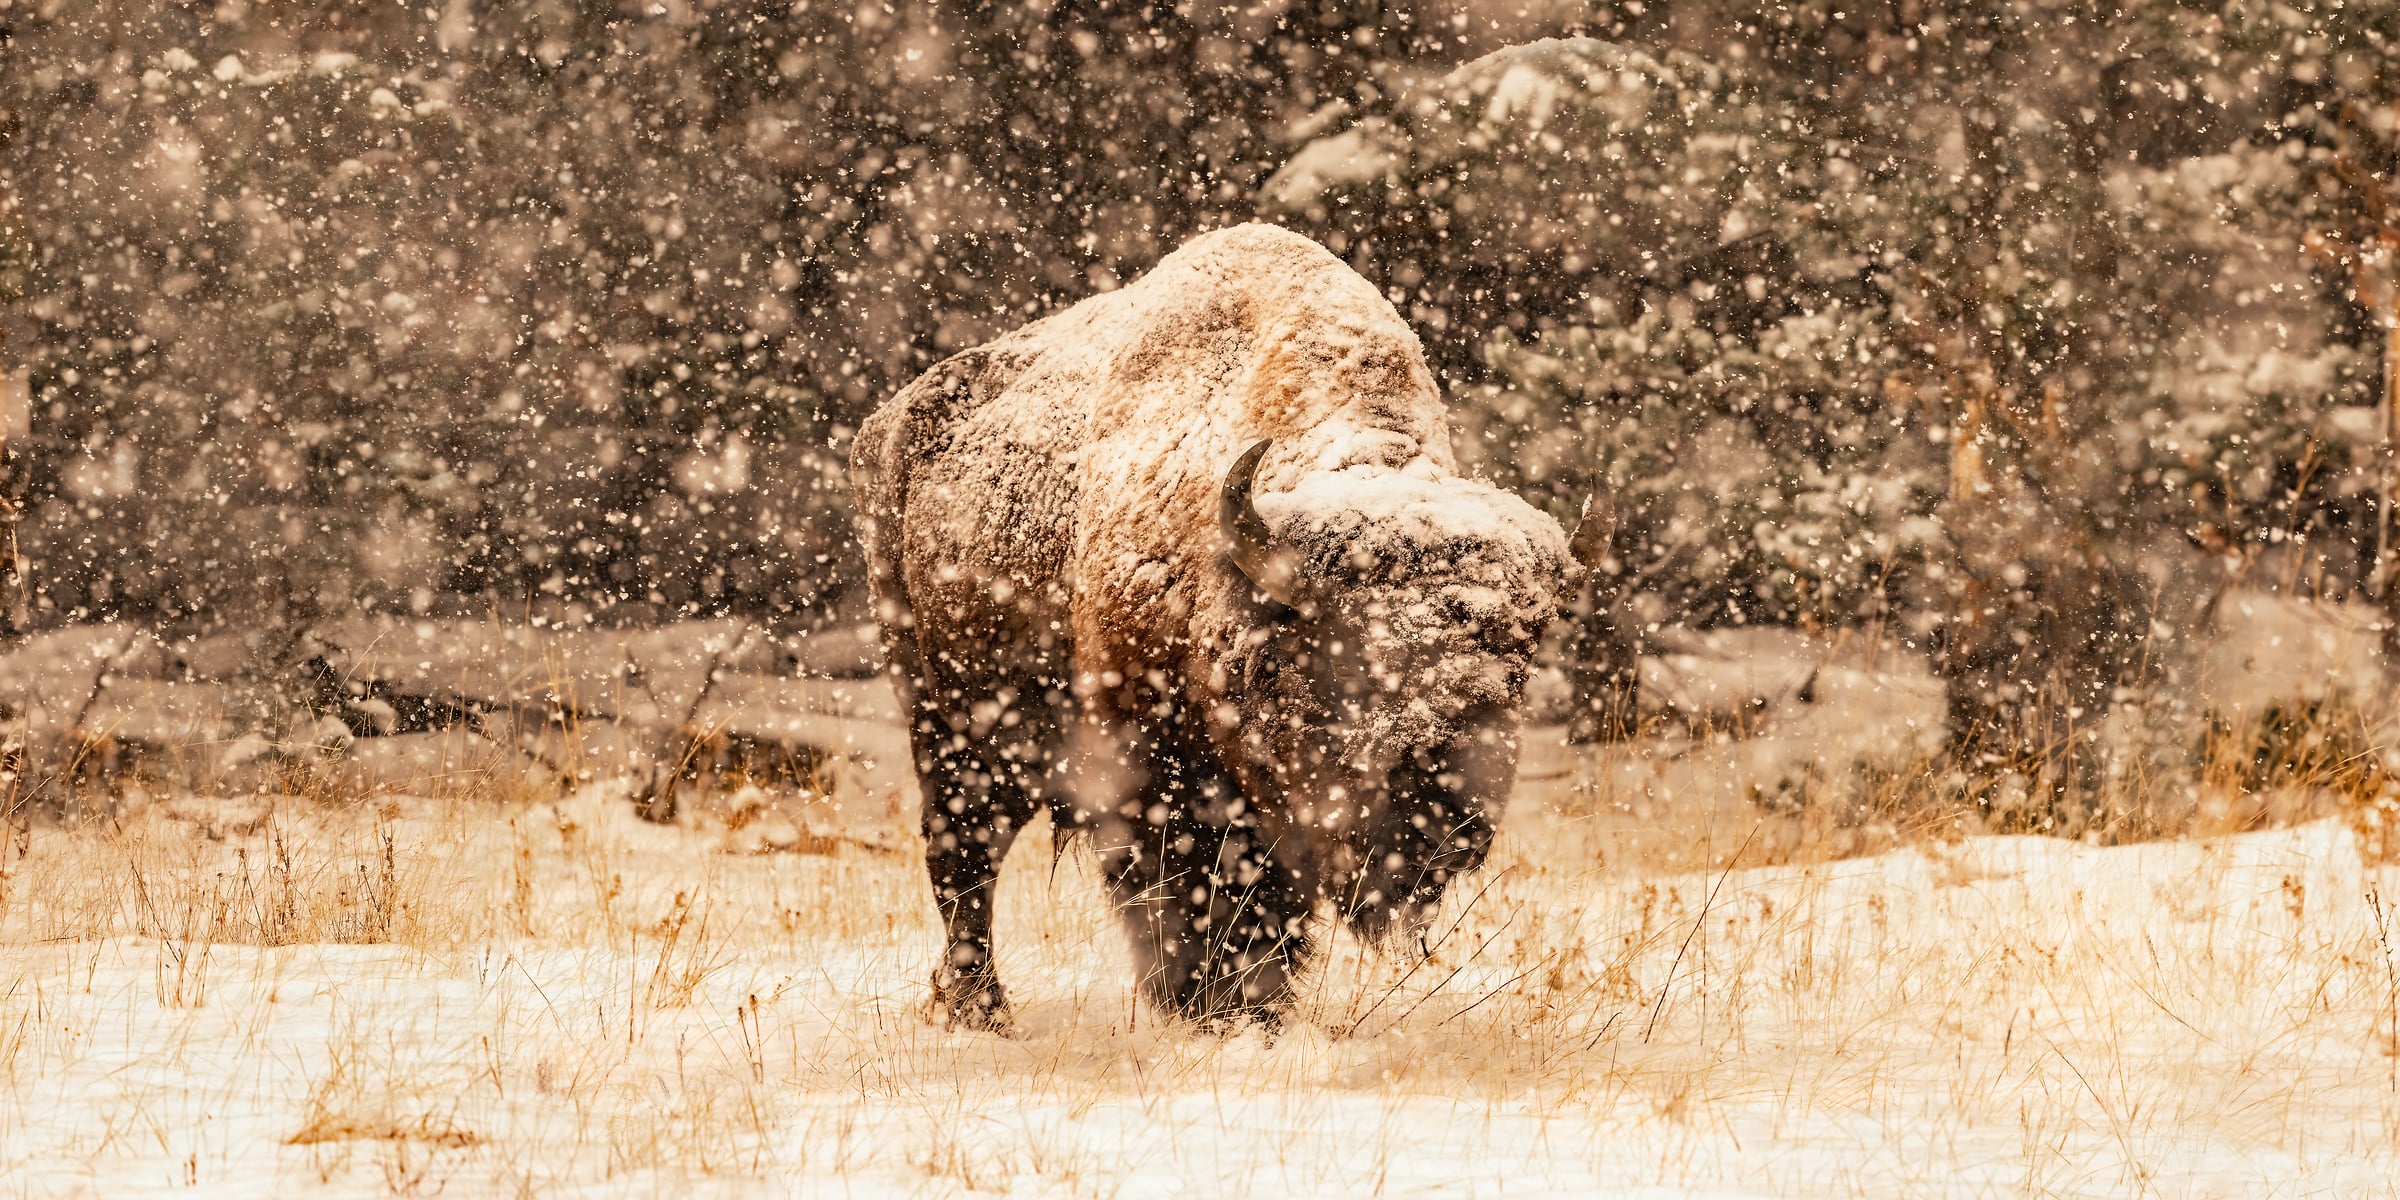 196 megapixels! A very high resolution, large-format VAST photo print of a bison in the snow in Yellowstone National Park; wildlife photograph created by David David in Wyoming